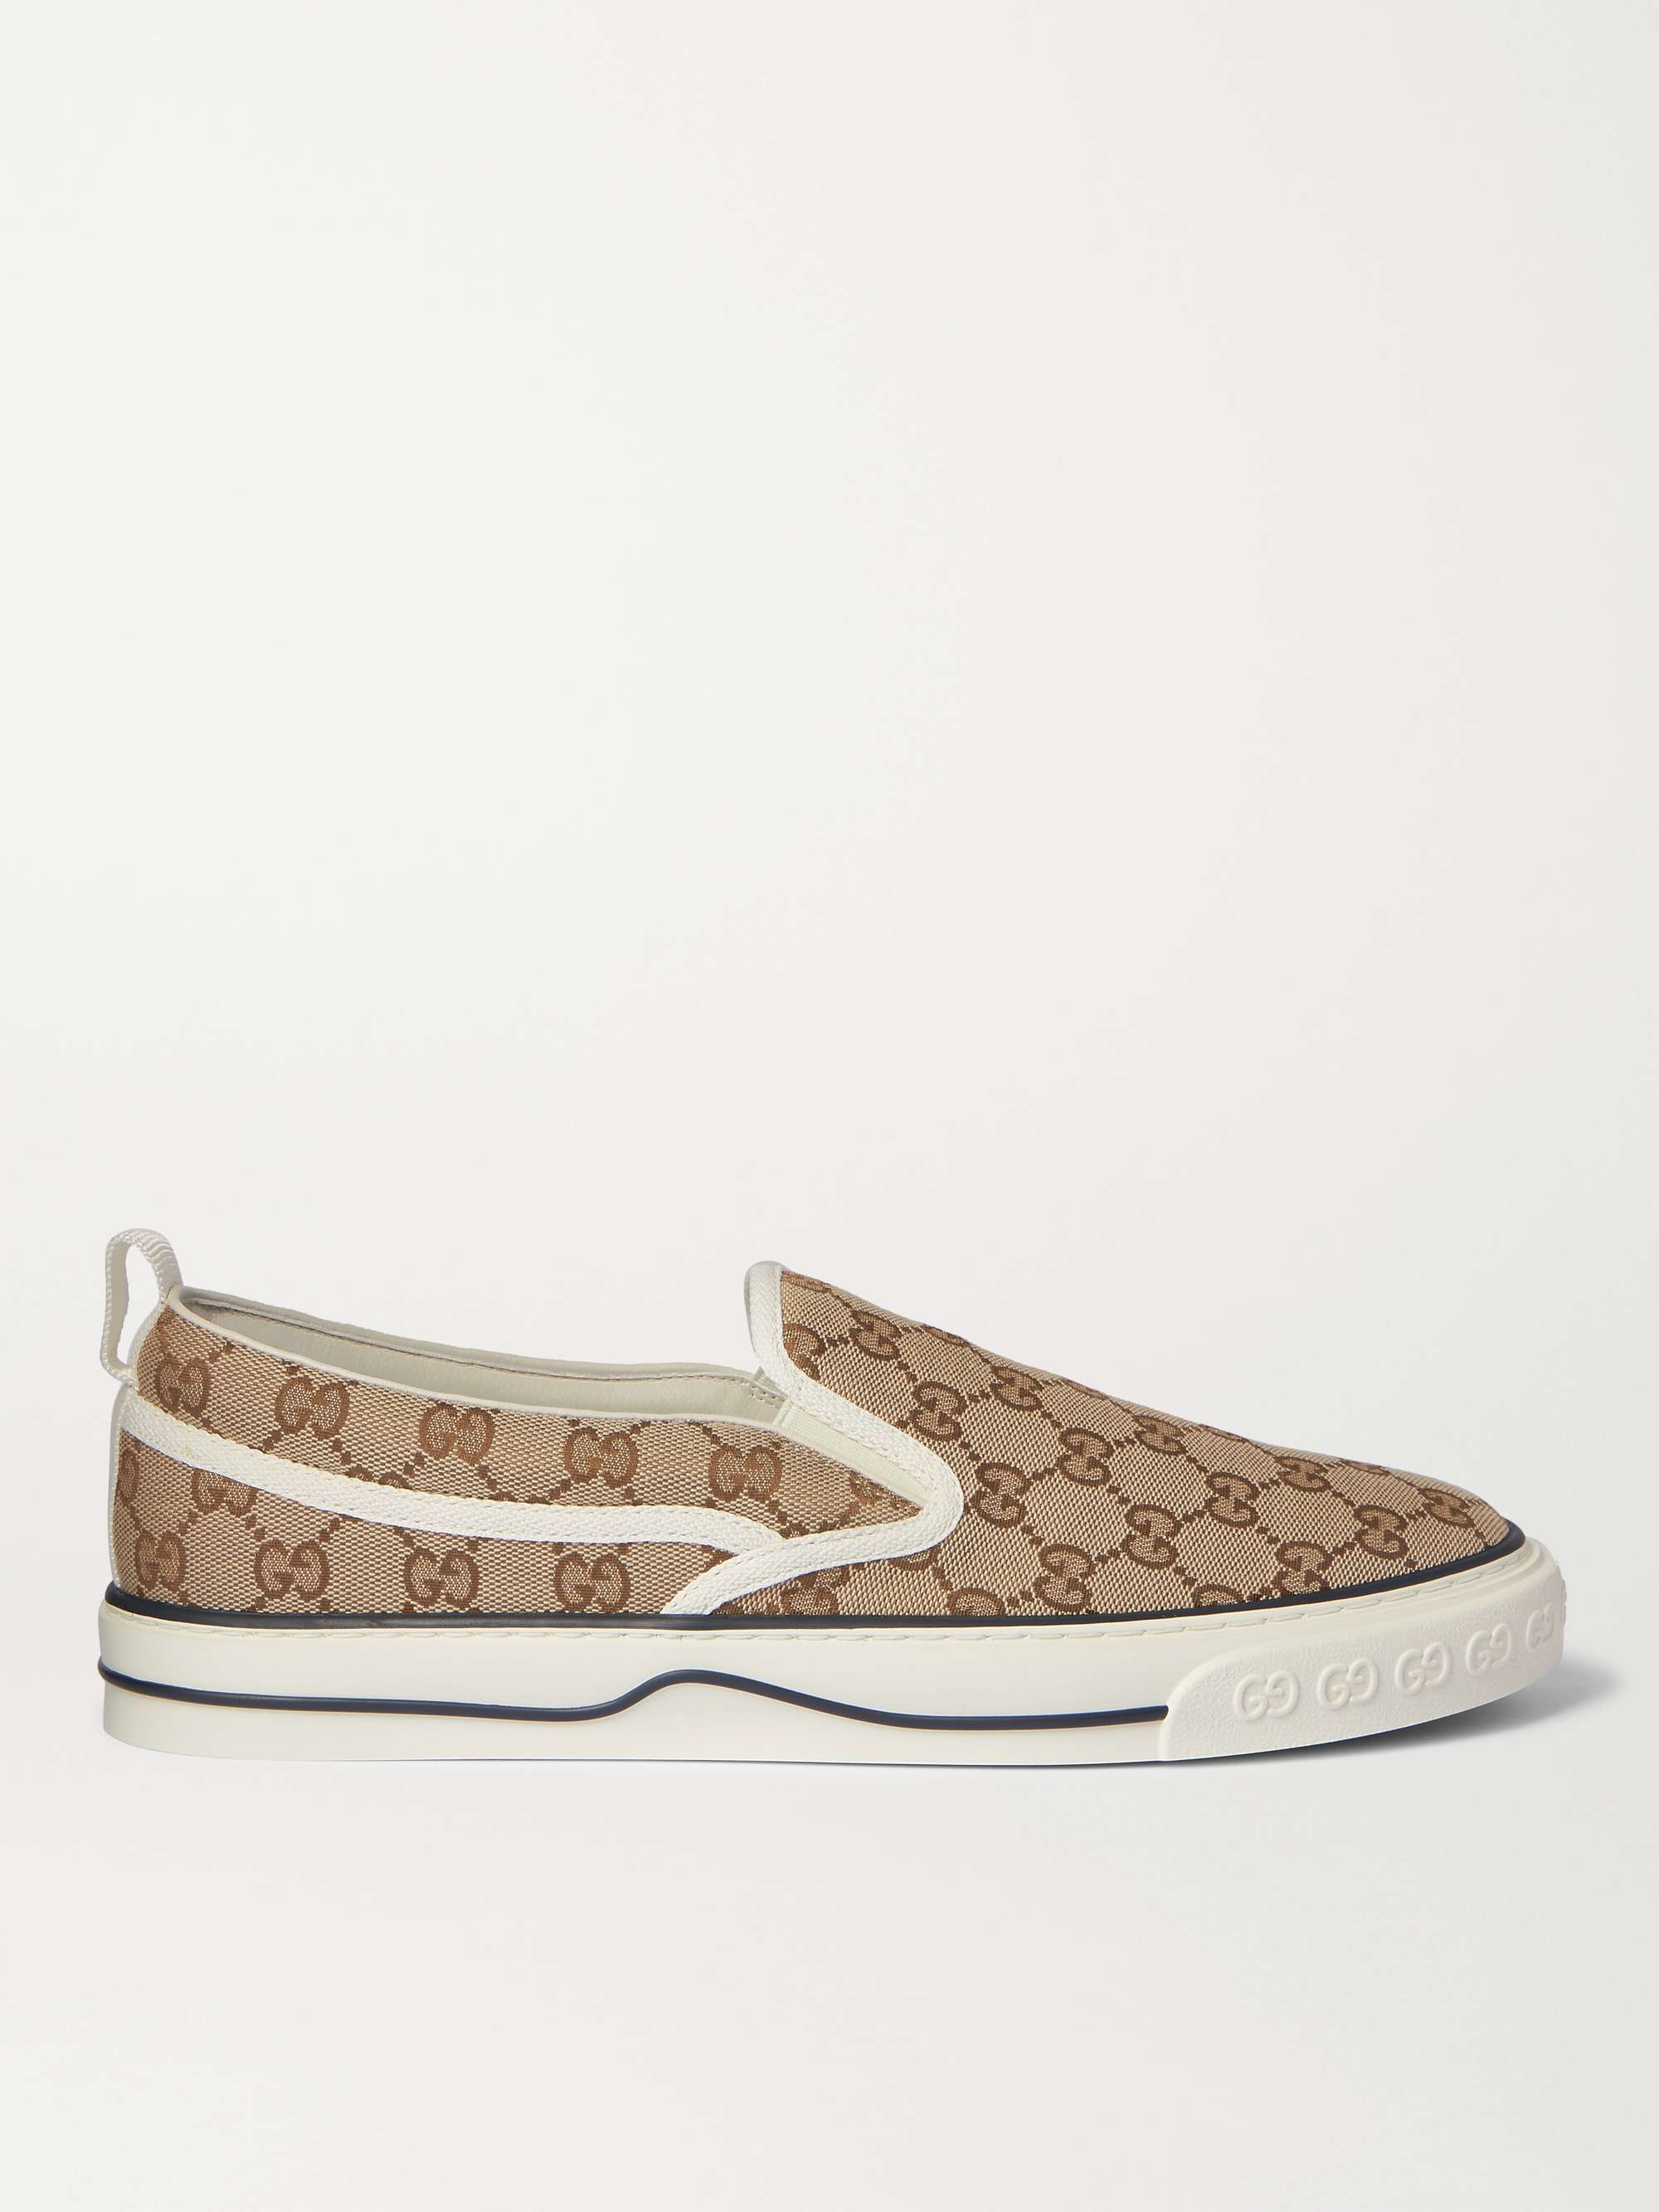 GUCCI Tennis 1977 Monogrammed Canvas Slip-On Sneakers